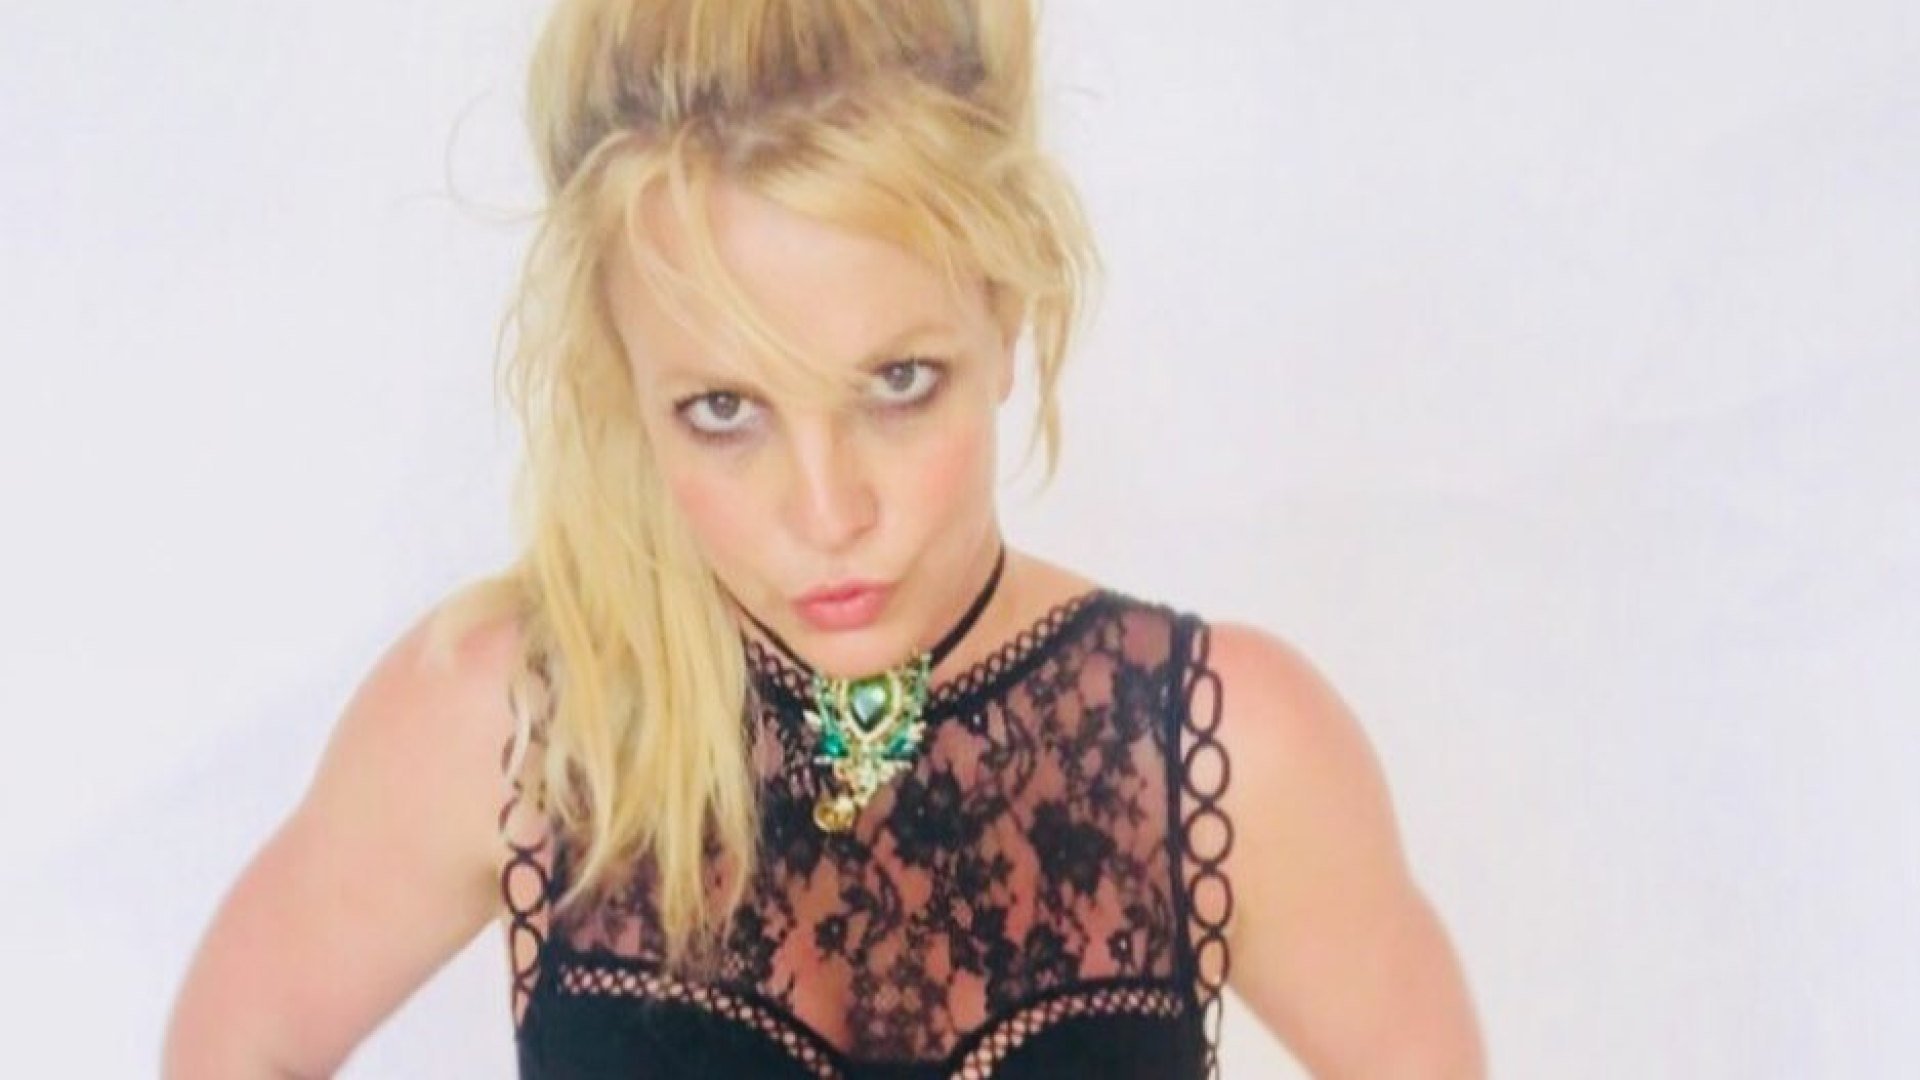 Britney Spears strips down to tights & lace crop top inside $7.4M mansion